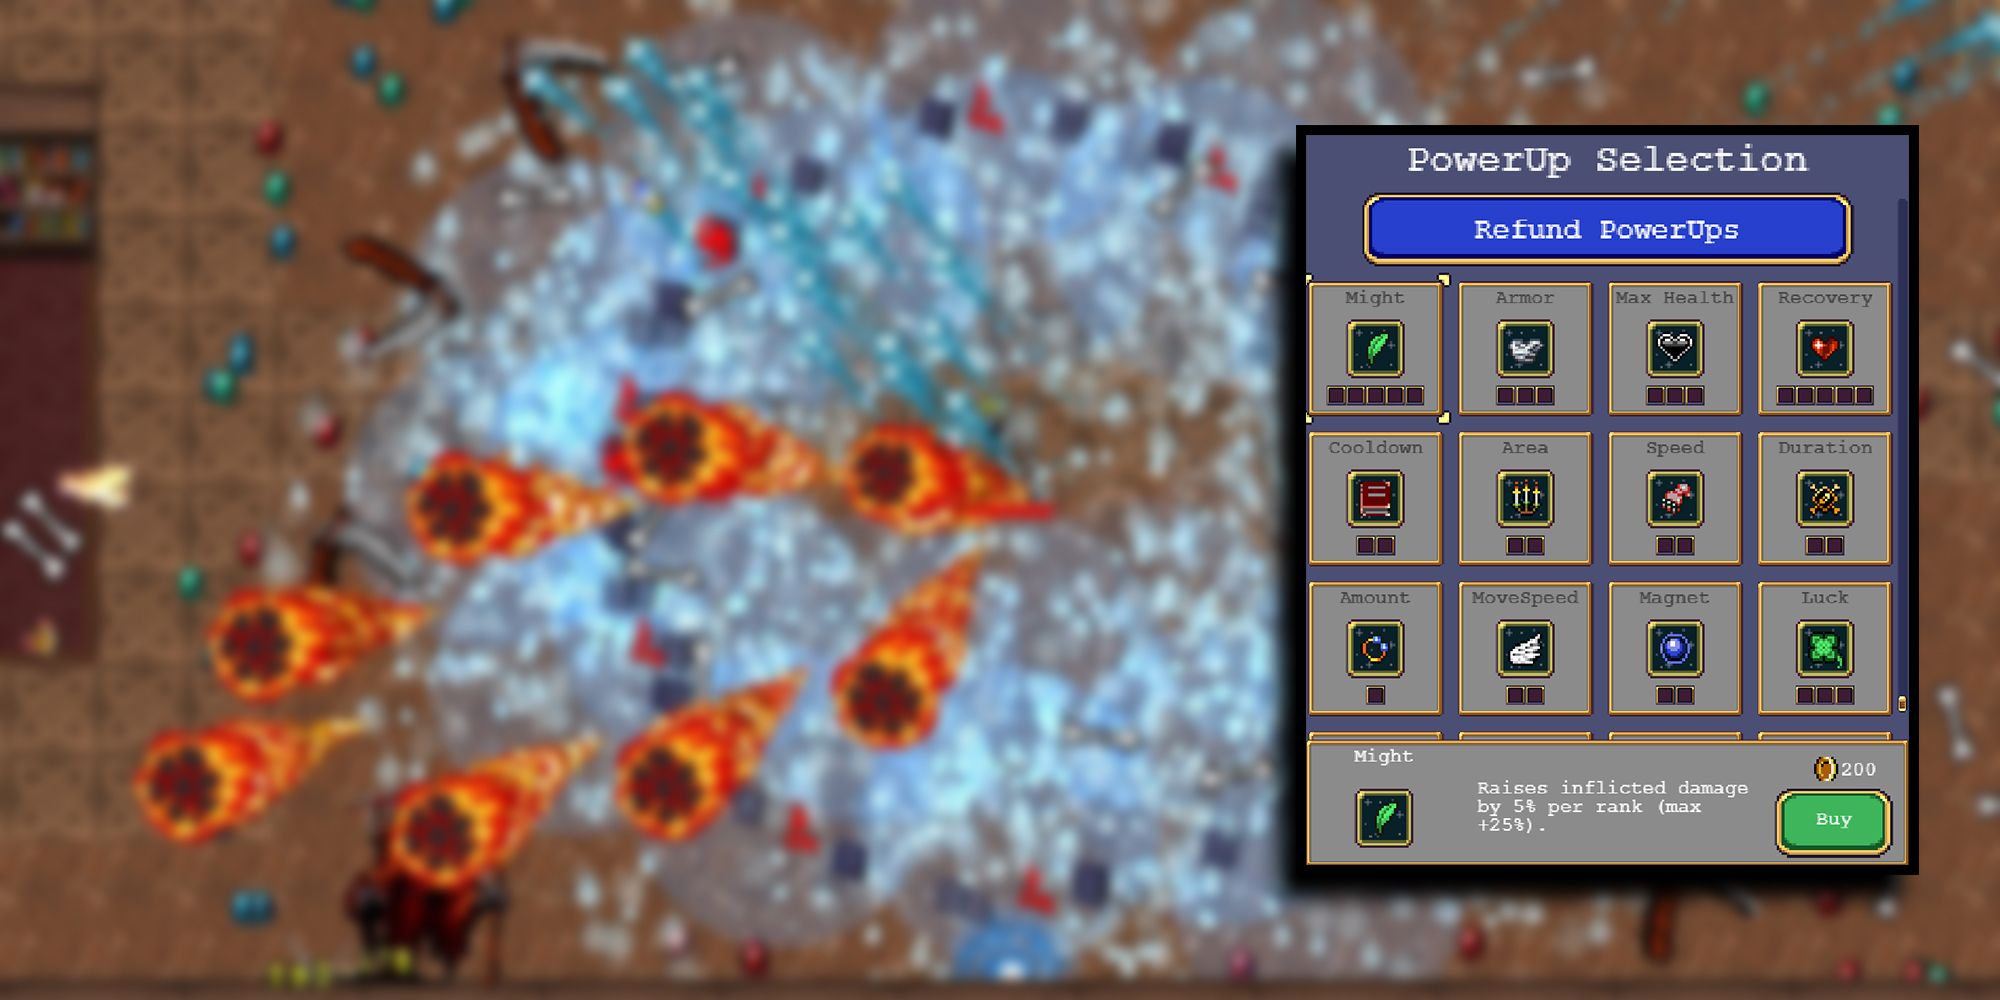 Vampire Survivors - Might PowerUp Overlaid On Image Of Player With A Ton Of High Damage Weapons Going Off